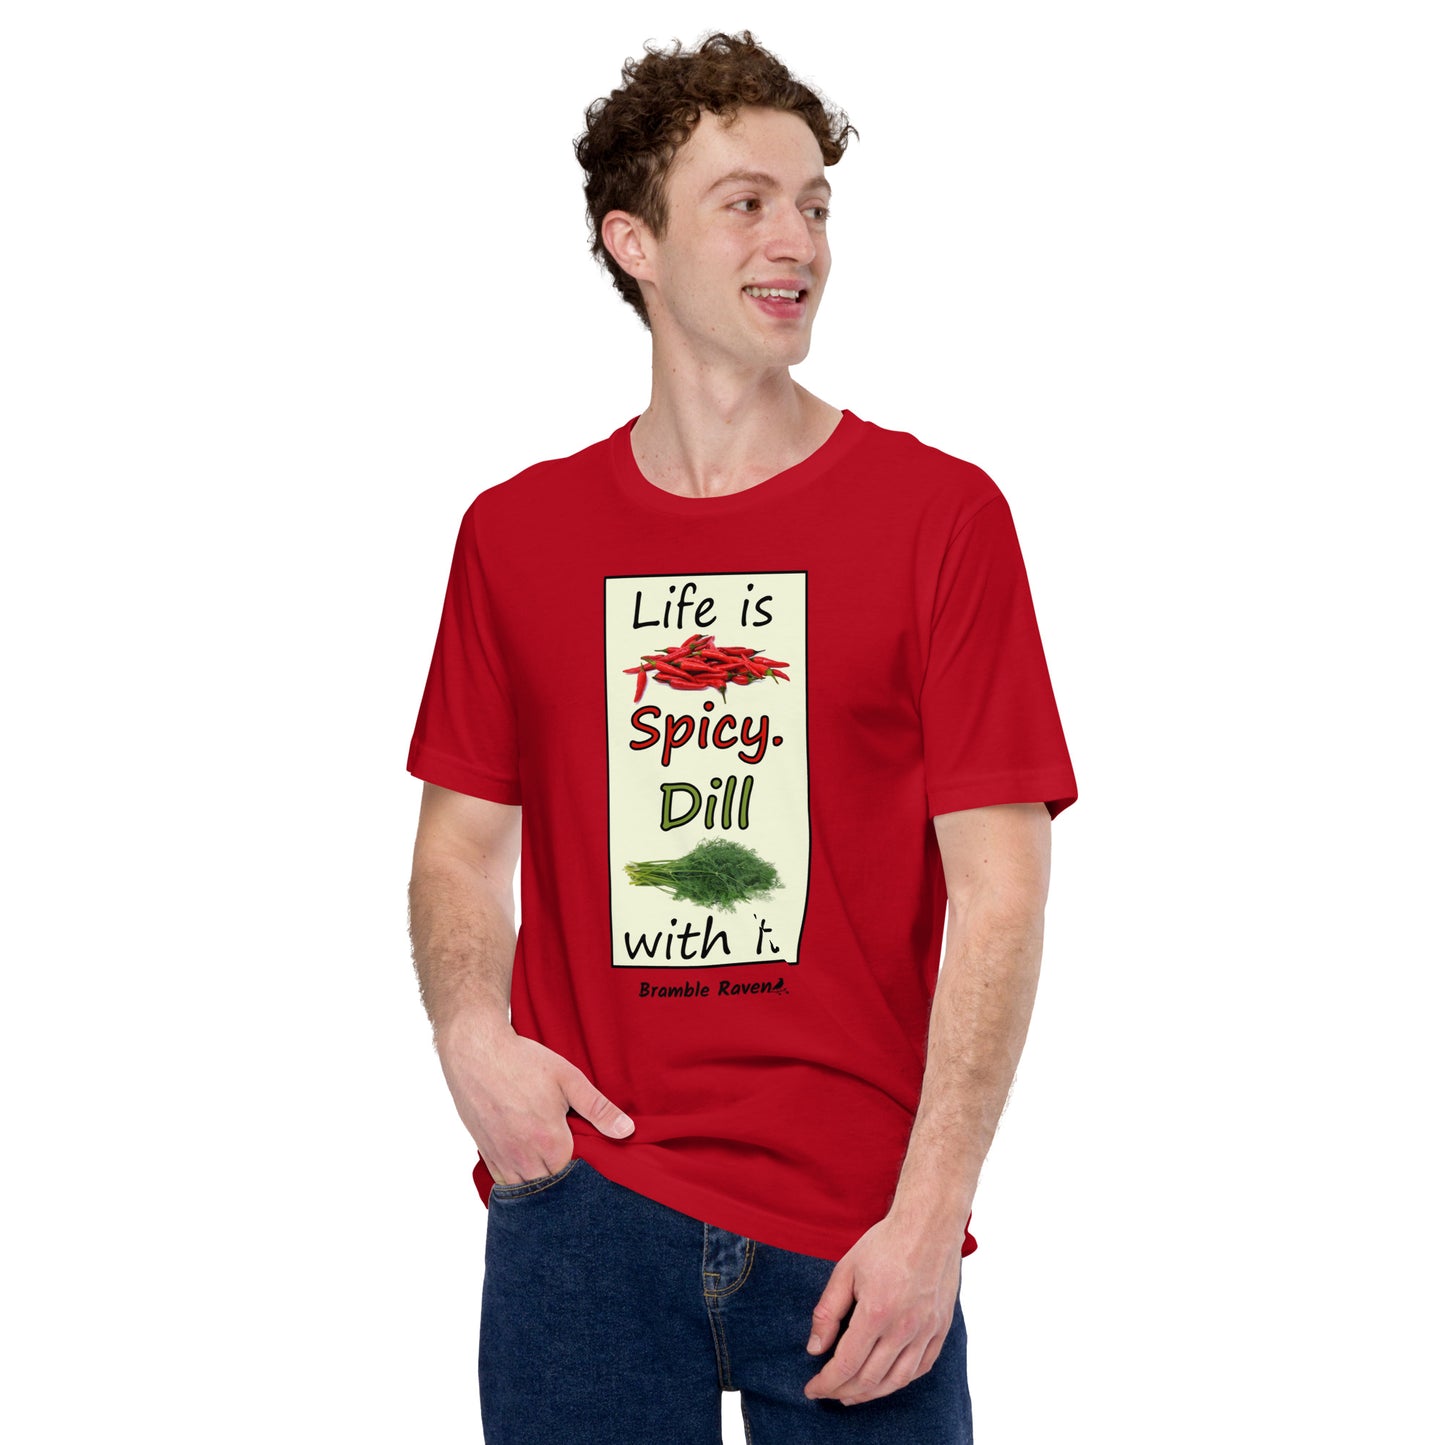 Life is spicy. Dill with it. Phrase with images of chili peppers and dill weed. Rectangular frame for saying on red colored unisex t-shirt. Shown on male model.